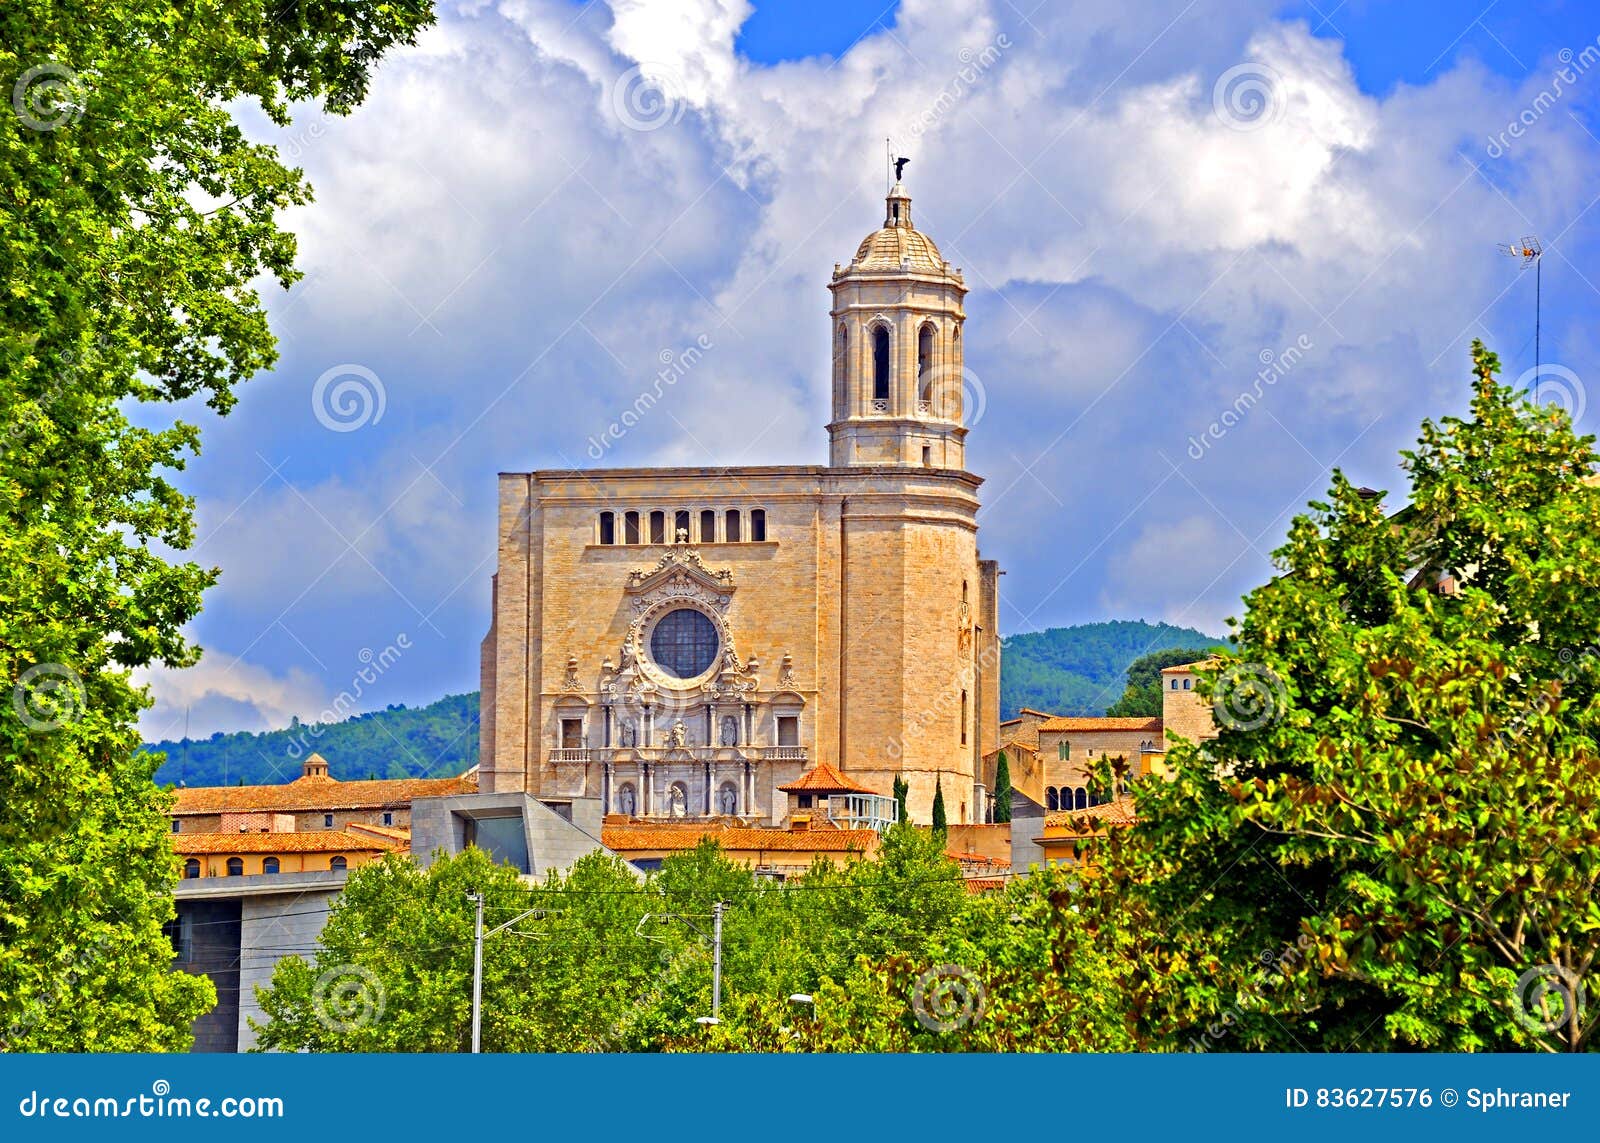 Cathedral of St. Mary in Girona, Spain. Cathedral of St. Mary in Girona ia an excellent example of Catalan Gothic architecture